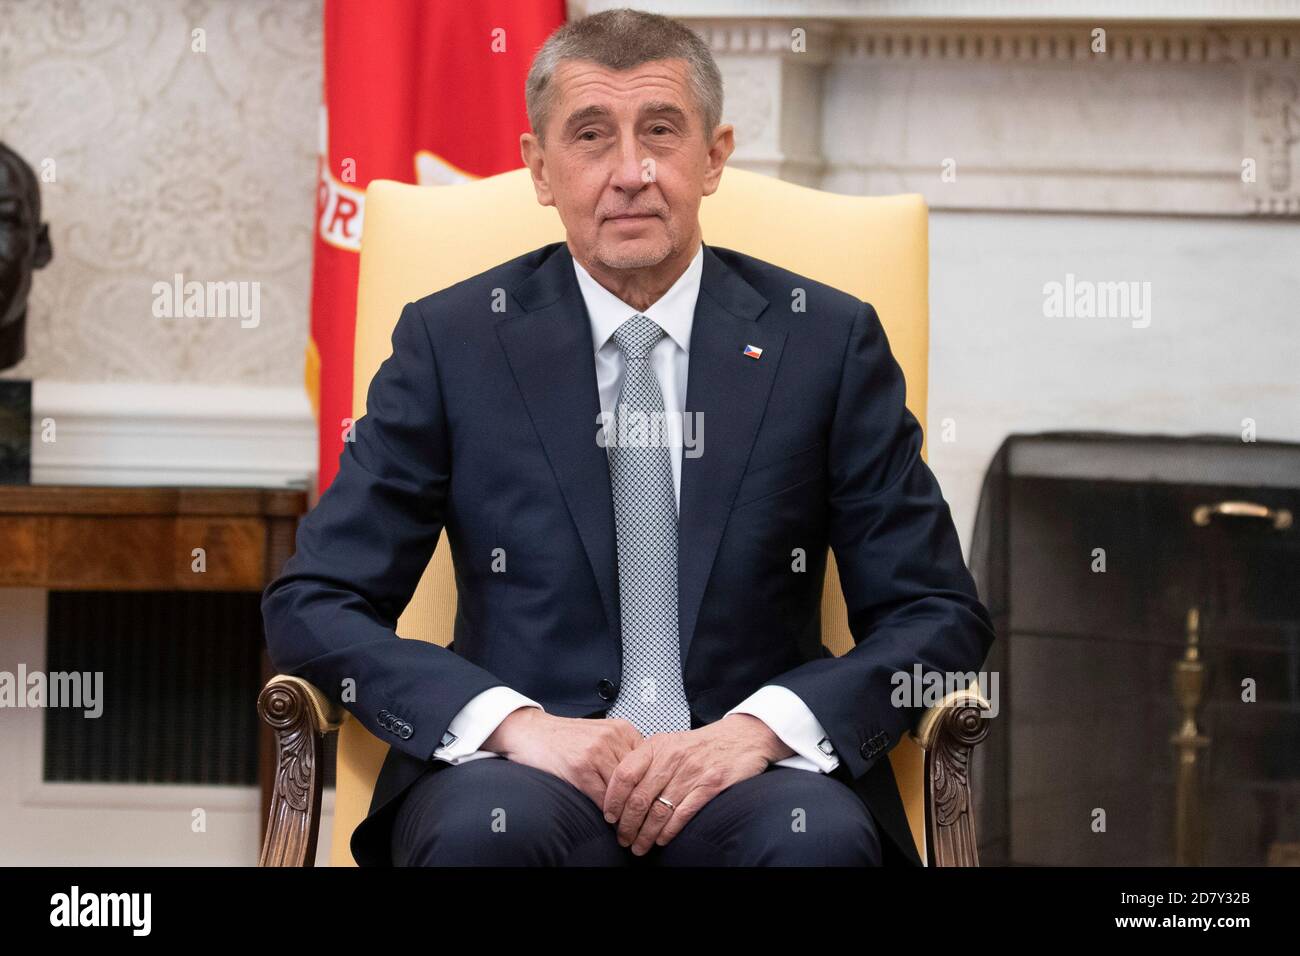 The Prime Minister of the Czech Republic Andrej Babiš speaks to U.S. President Donald Trump and First Lady Melania Trump during a meeting in the Oval Office at the White House in Washington, D.C. on March 7, 2019. Credit: Alex Edelman/The Photo Access Stock Photo